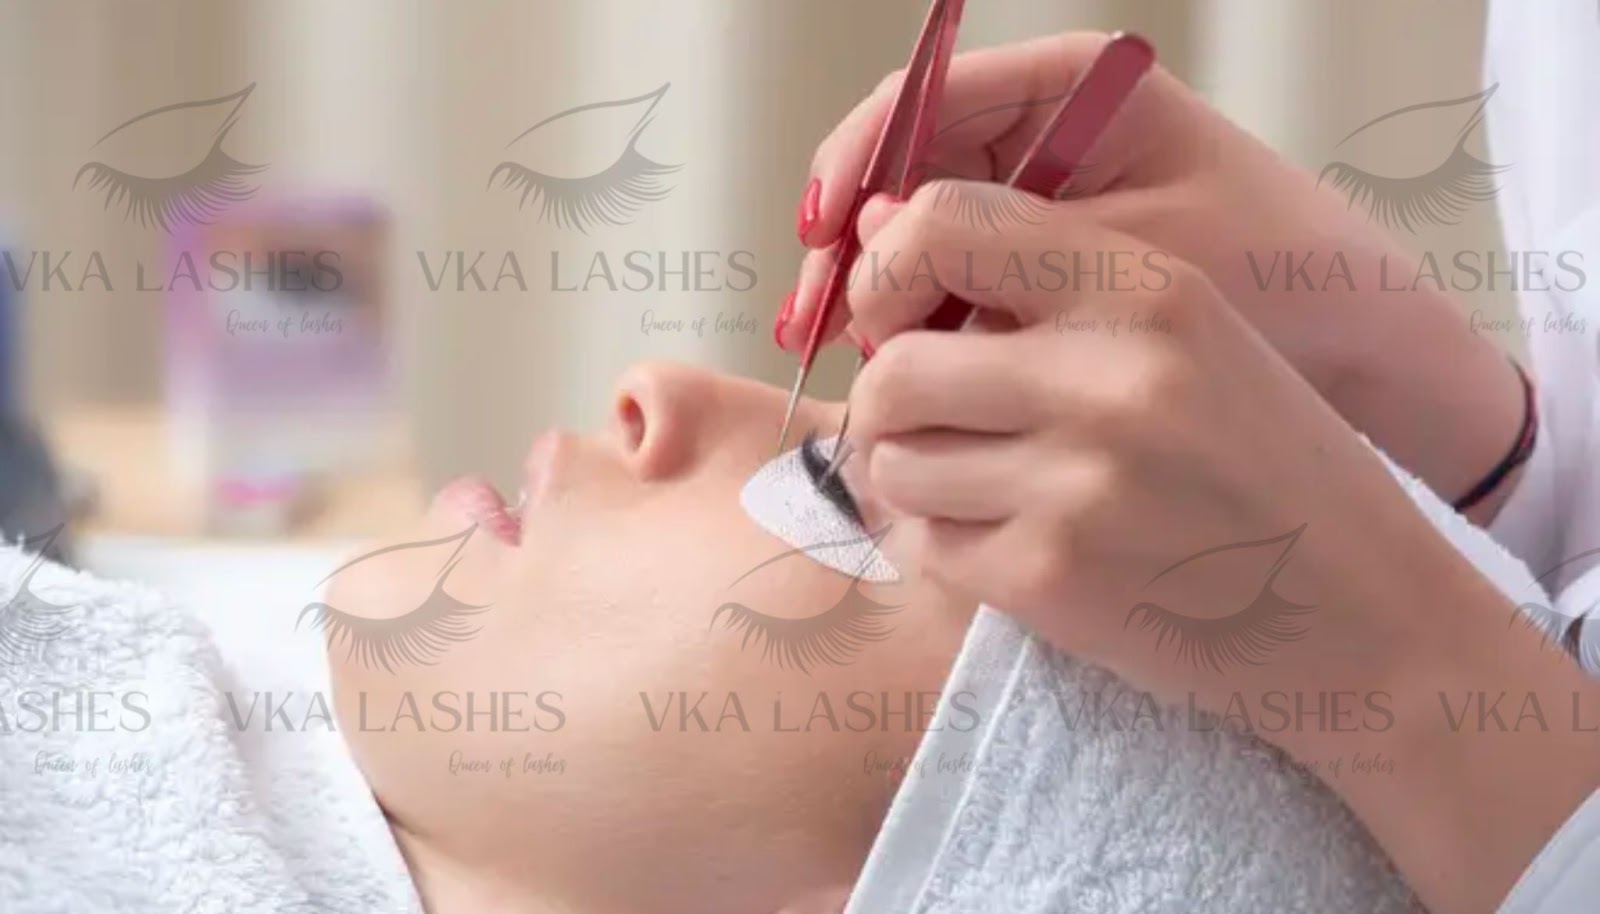 Market overview of eyelash extension suppliers UK